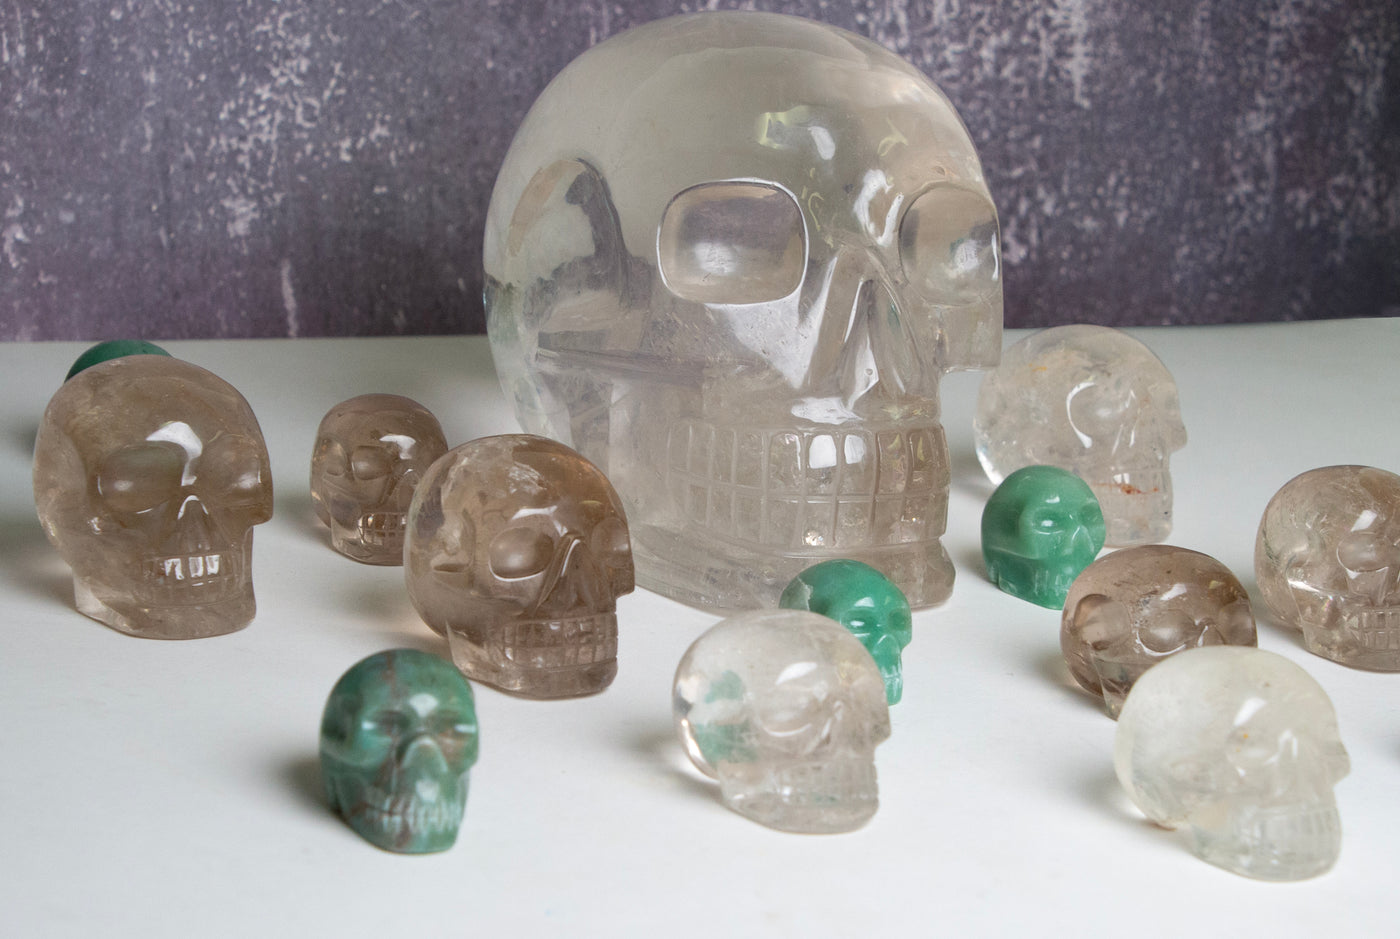 How to Use a Crystal Skull to Charge Your Other Crystals